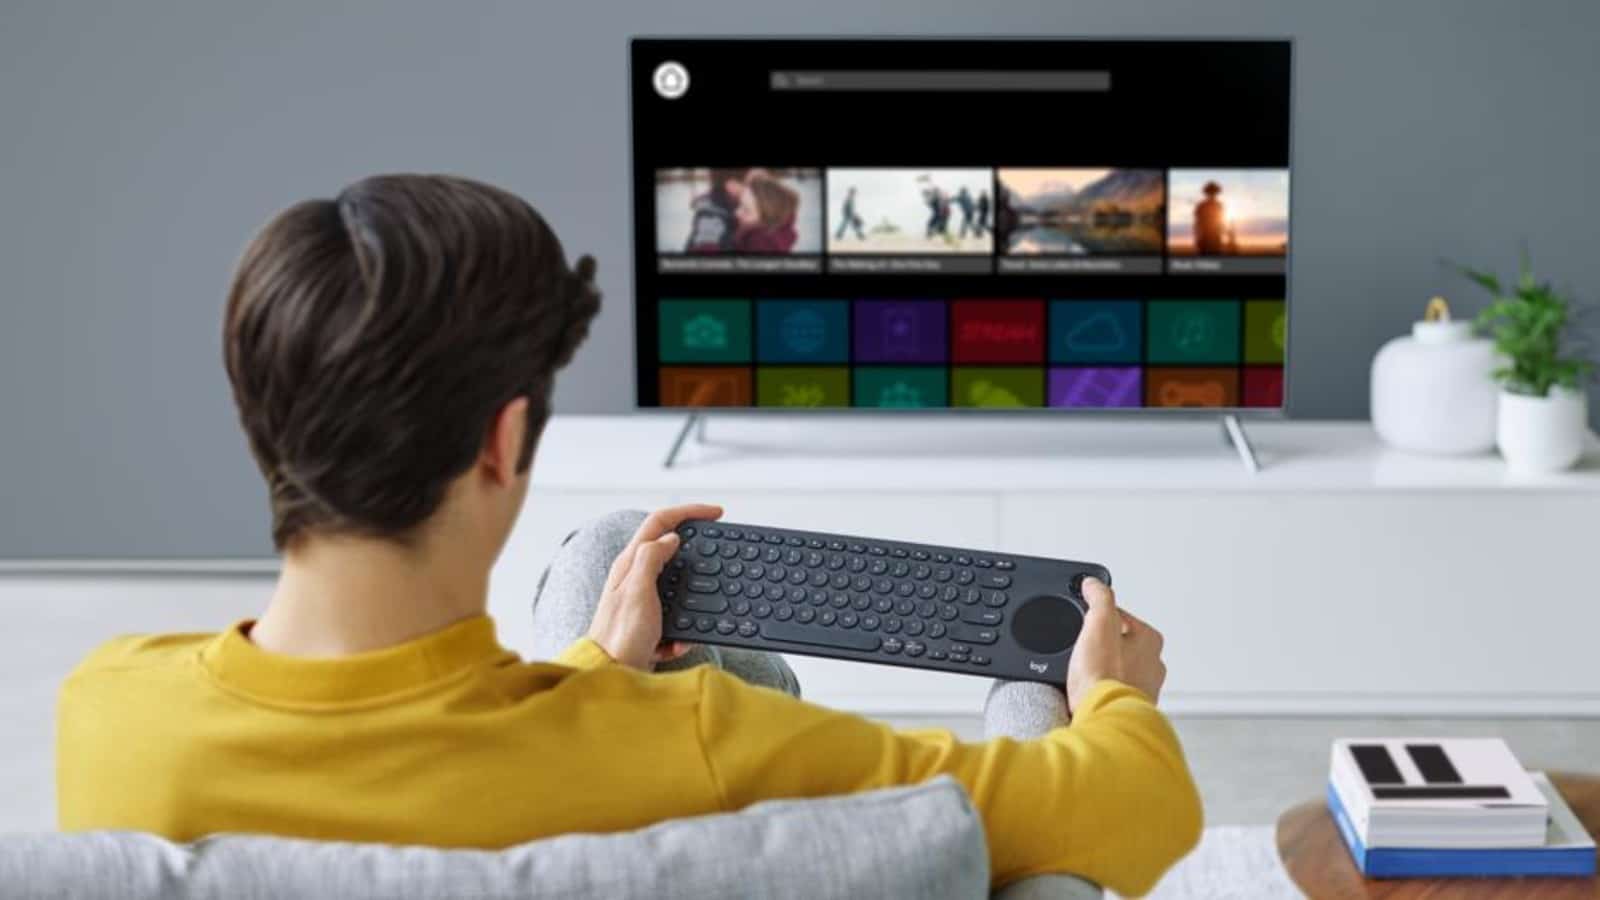 What Keyboard Is Compatible With Samsung Smart TV?